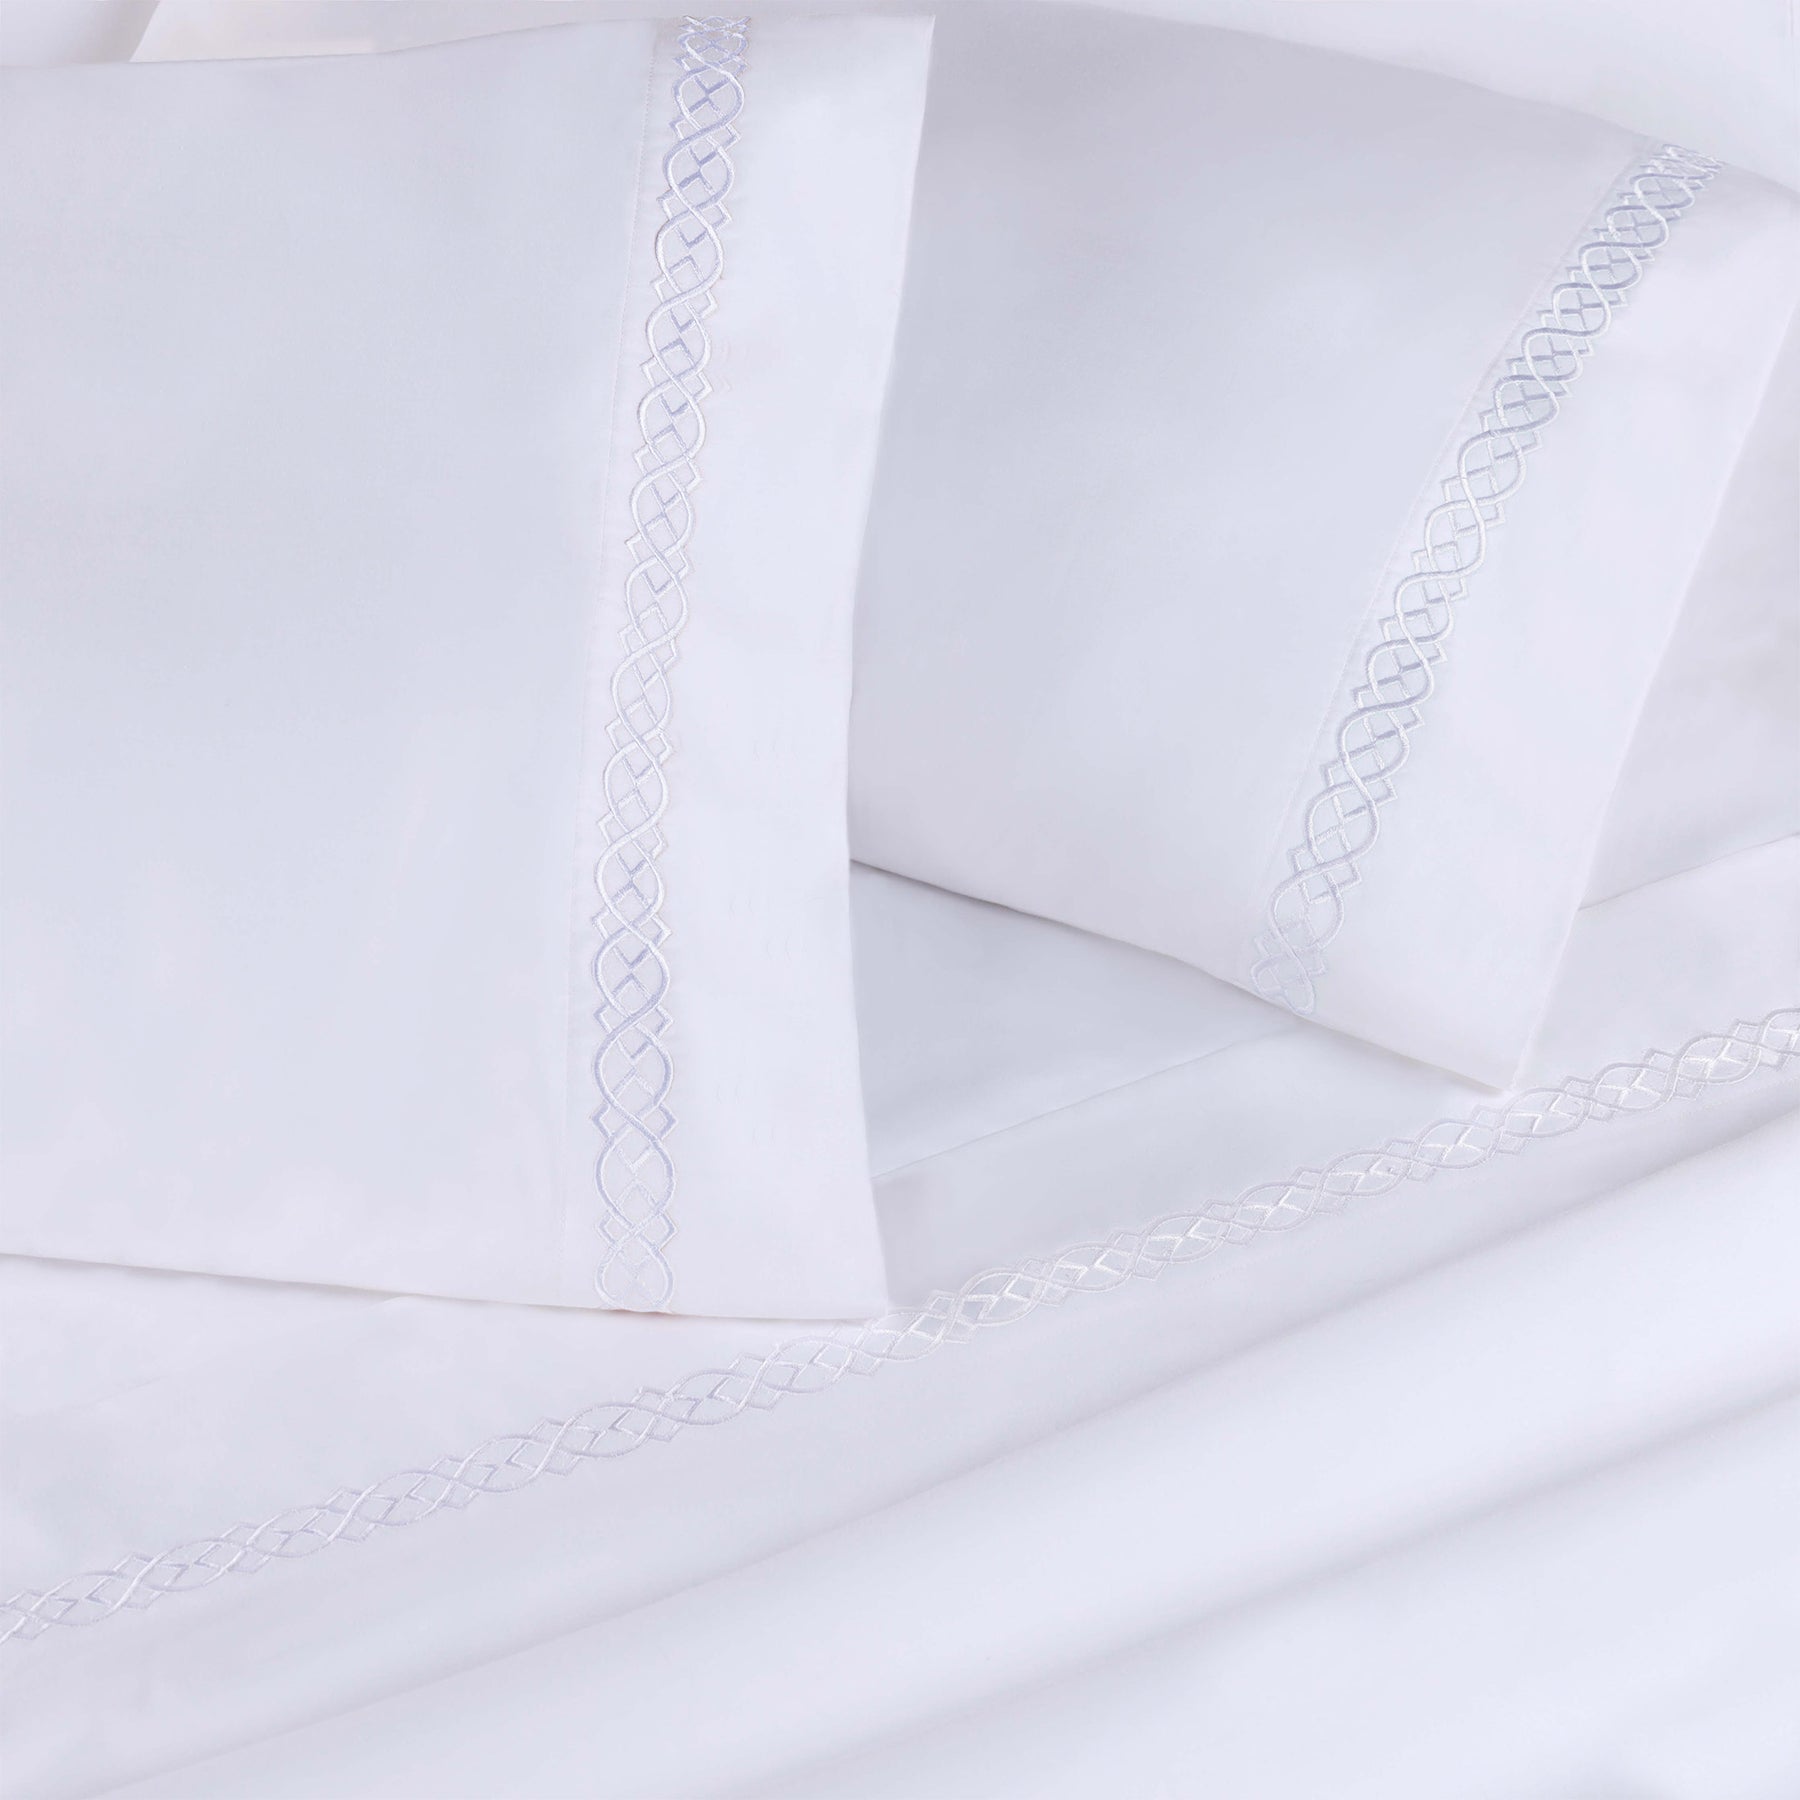 Egyptian Cotton 1000 Thread Count Embroidered Bed Sheet Set - White - White